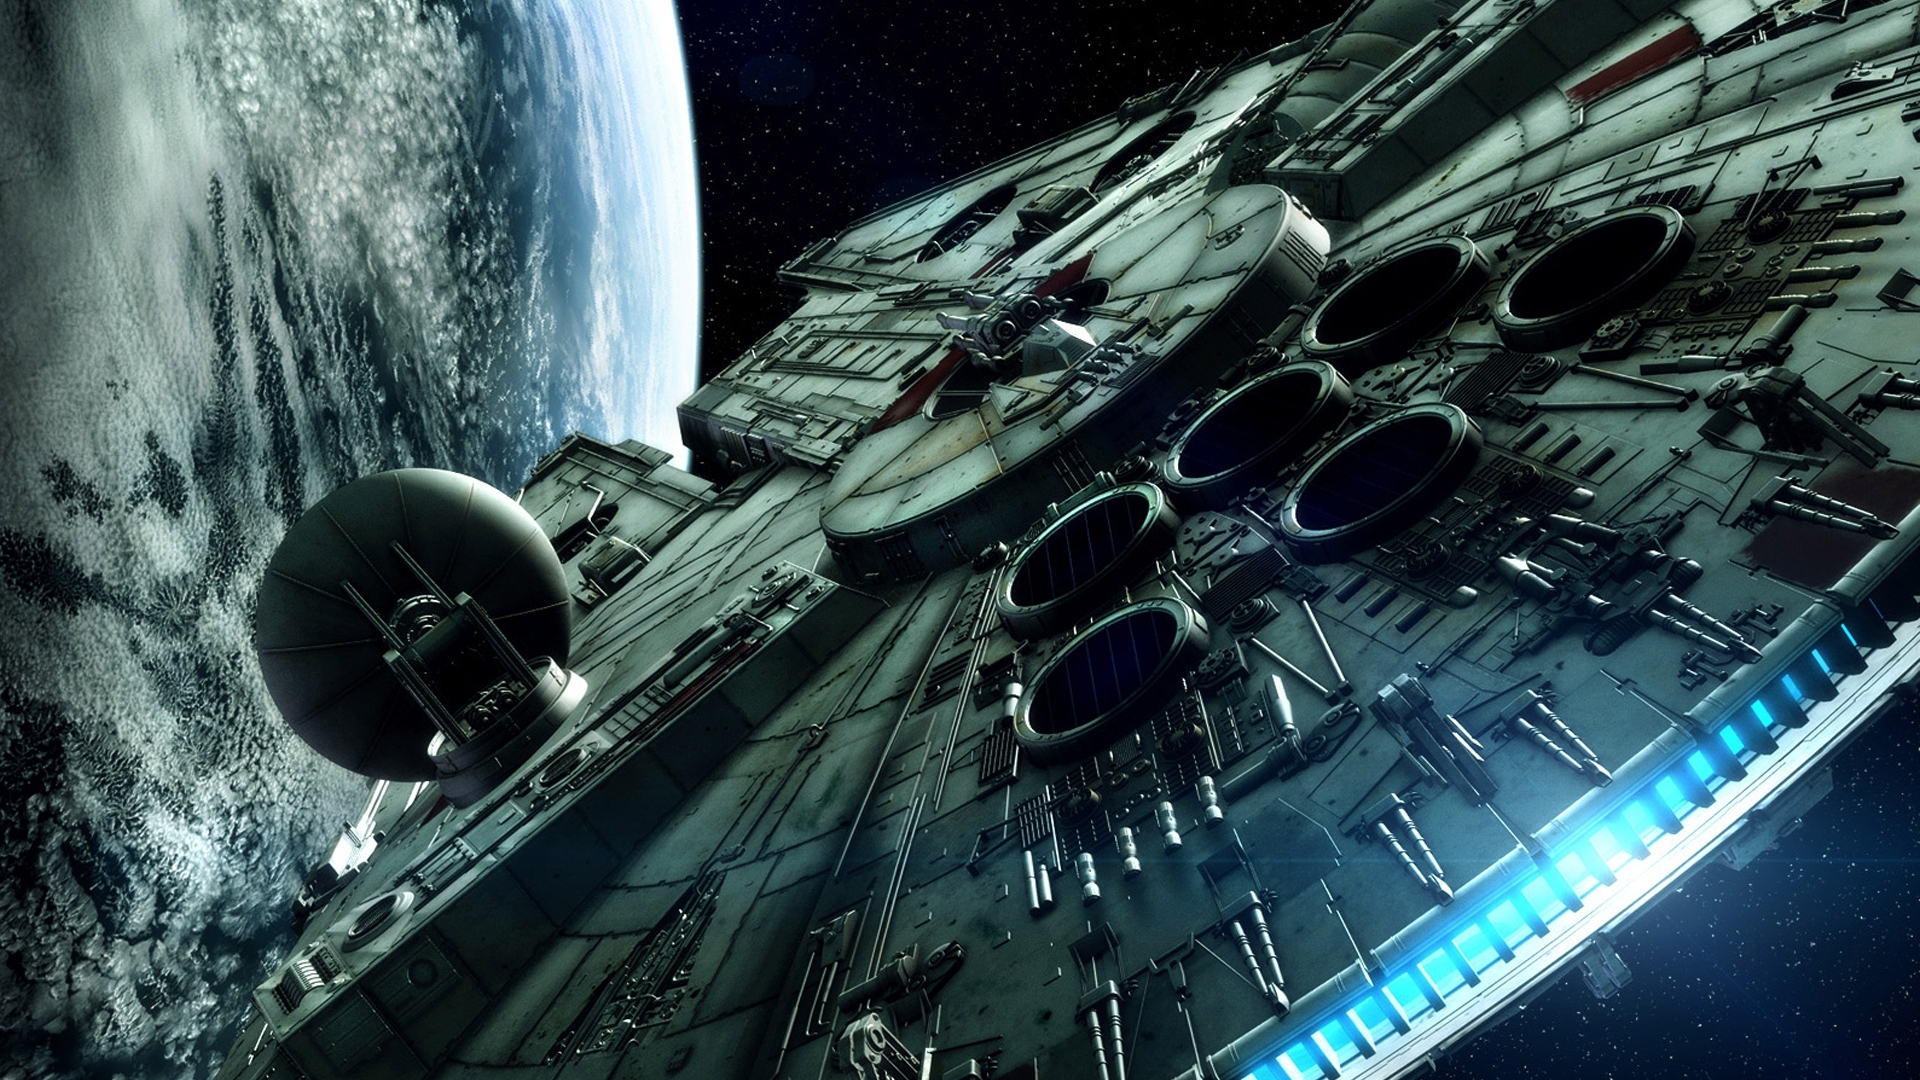 10 New Star Wars Hd Wallpaper Widescreen FULL HD 1920×1080 For PC Background